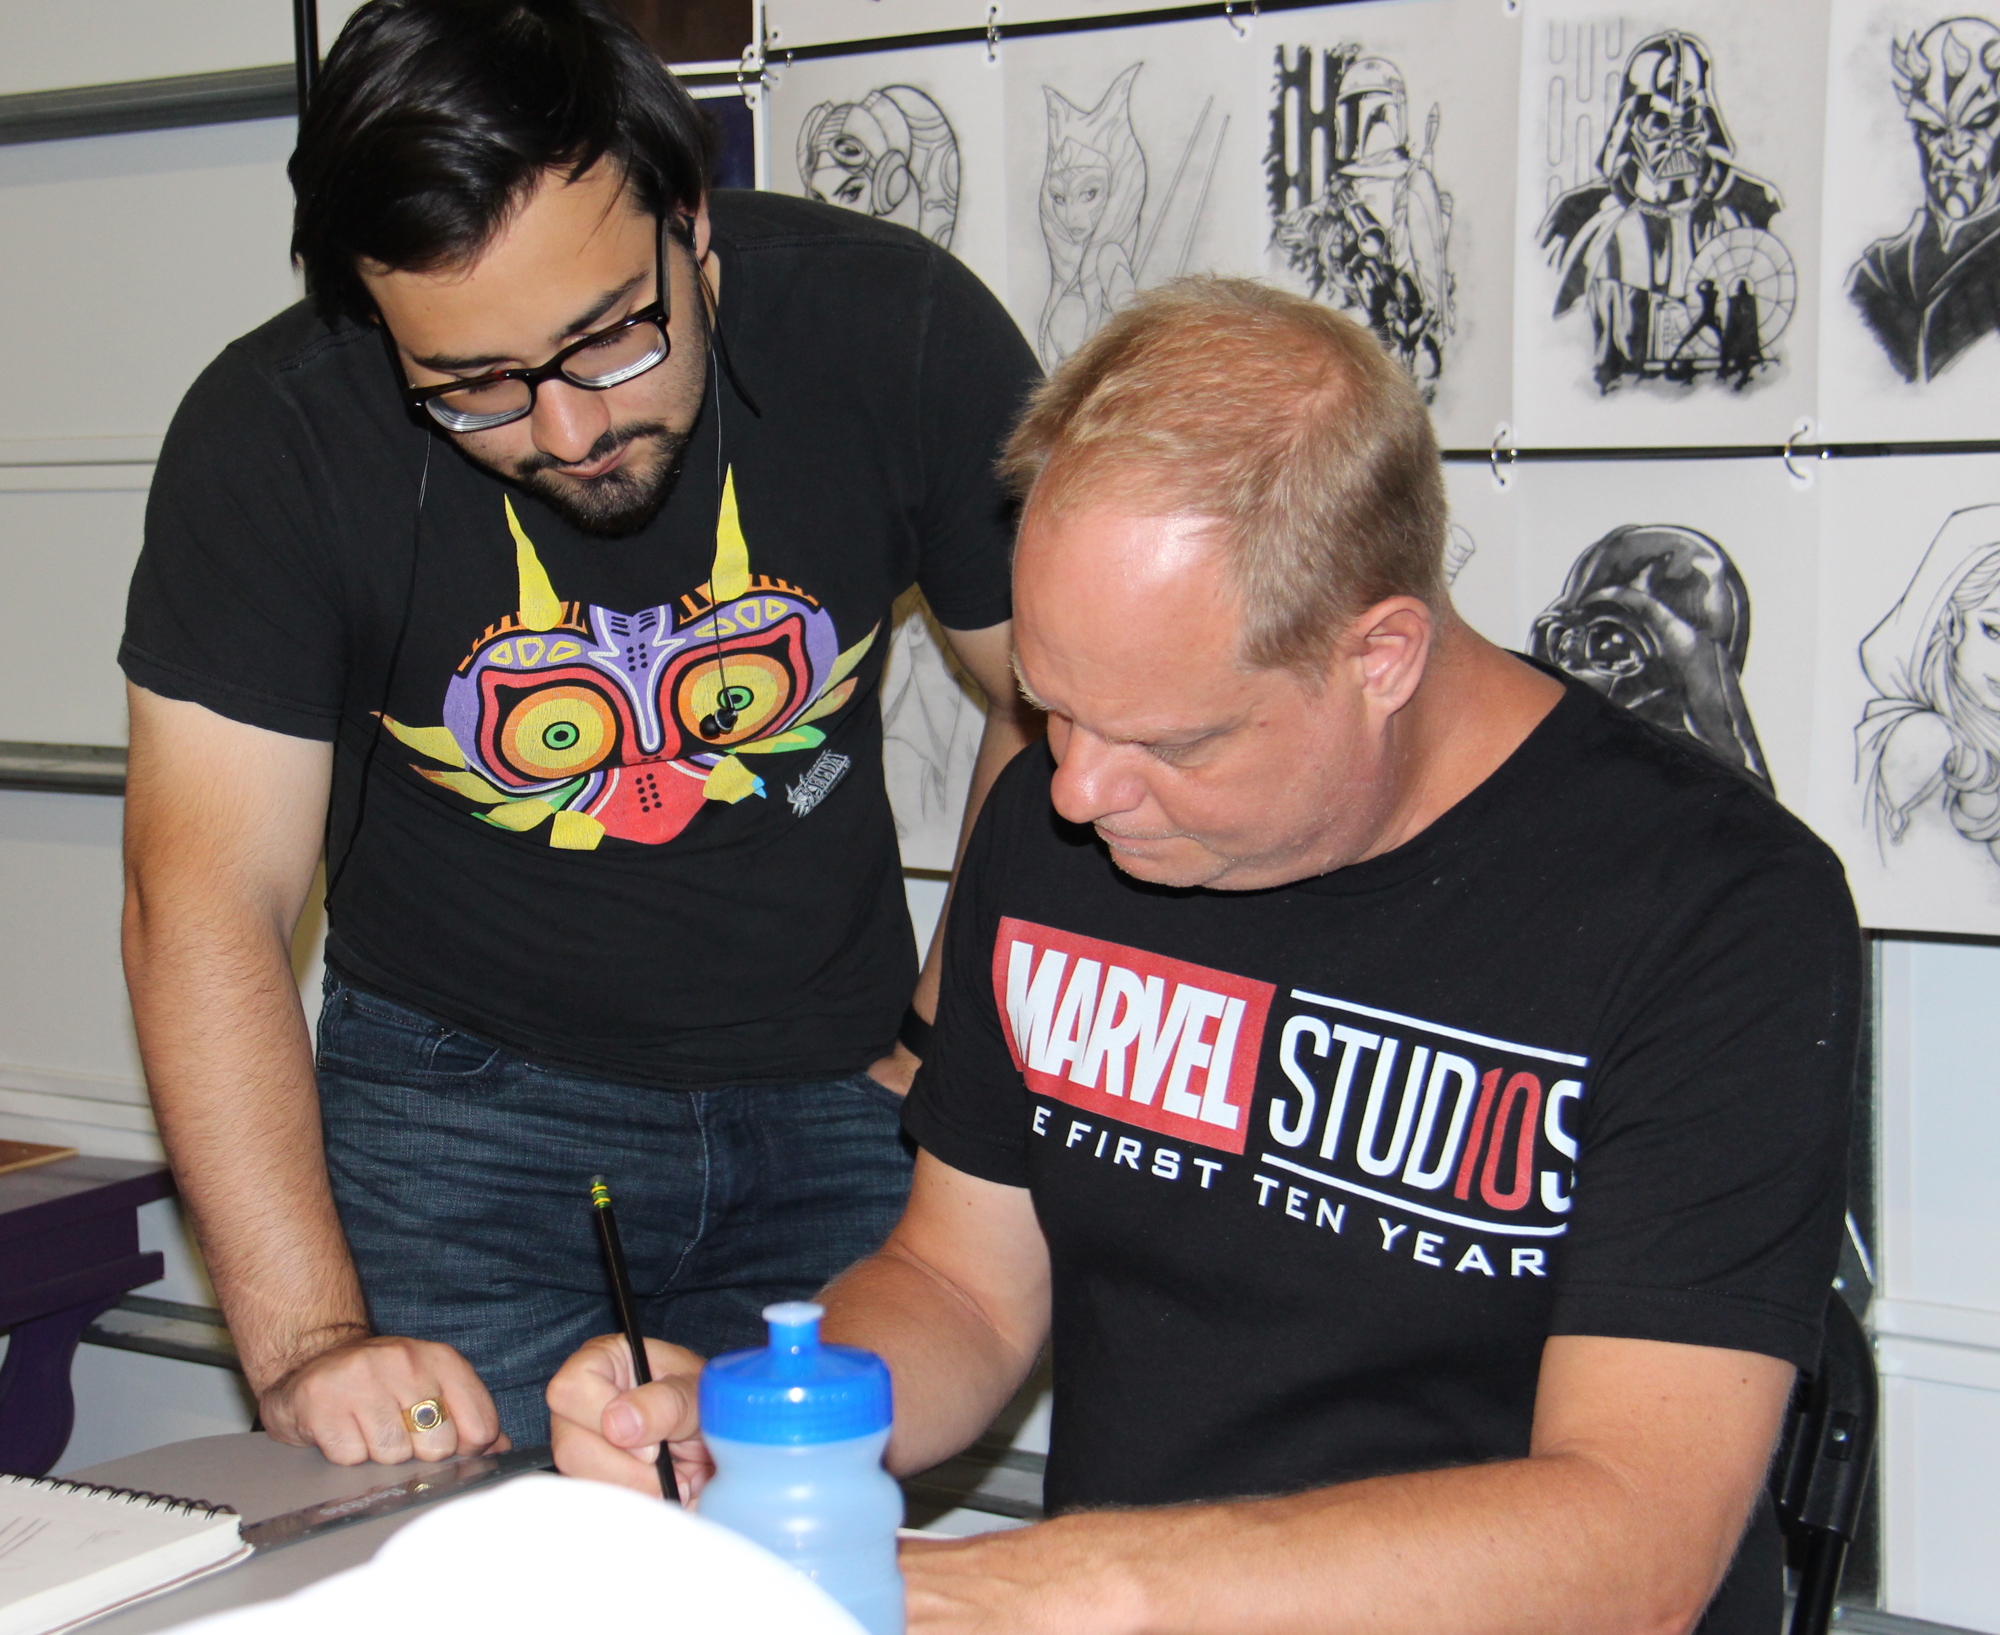 Peter Smith, right, works on a drawing with Nico Perez at the Florida Film Academy, where Smith teaches illustration and character design.